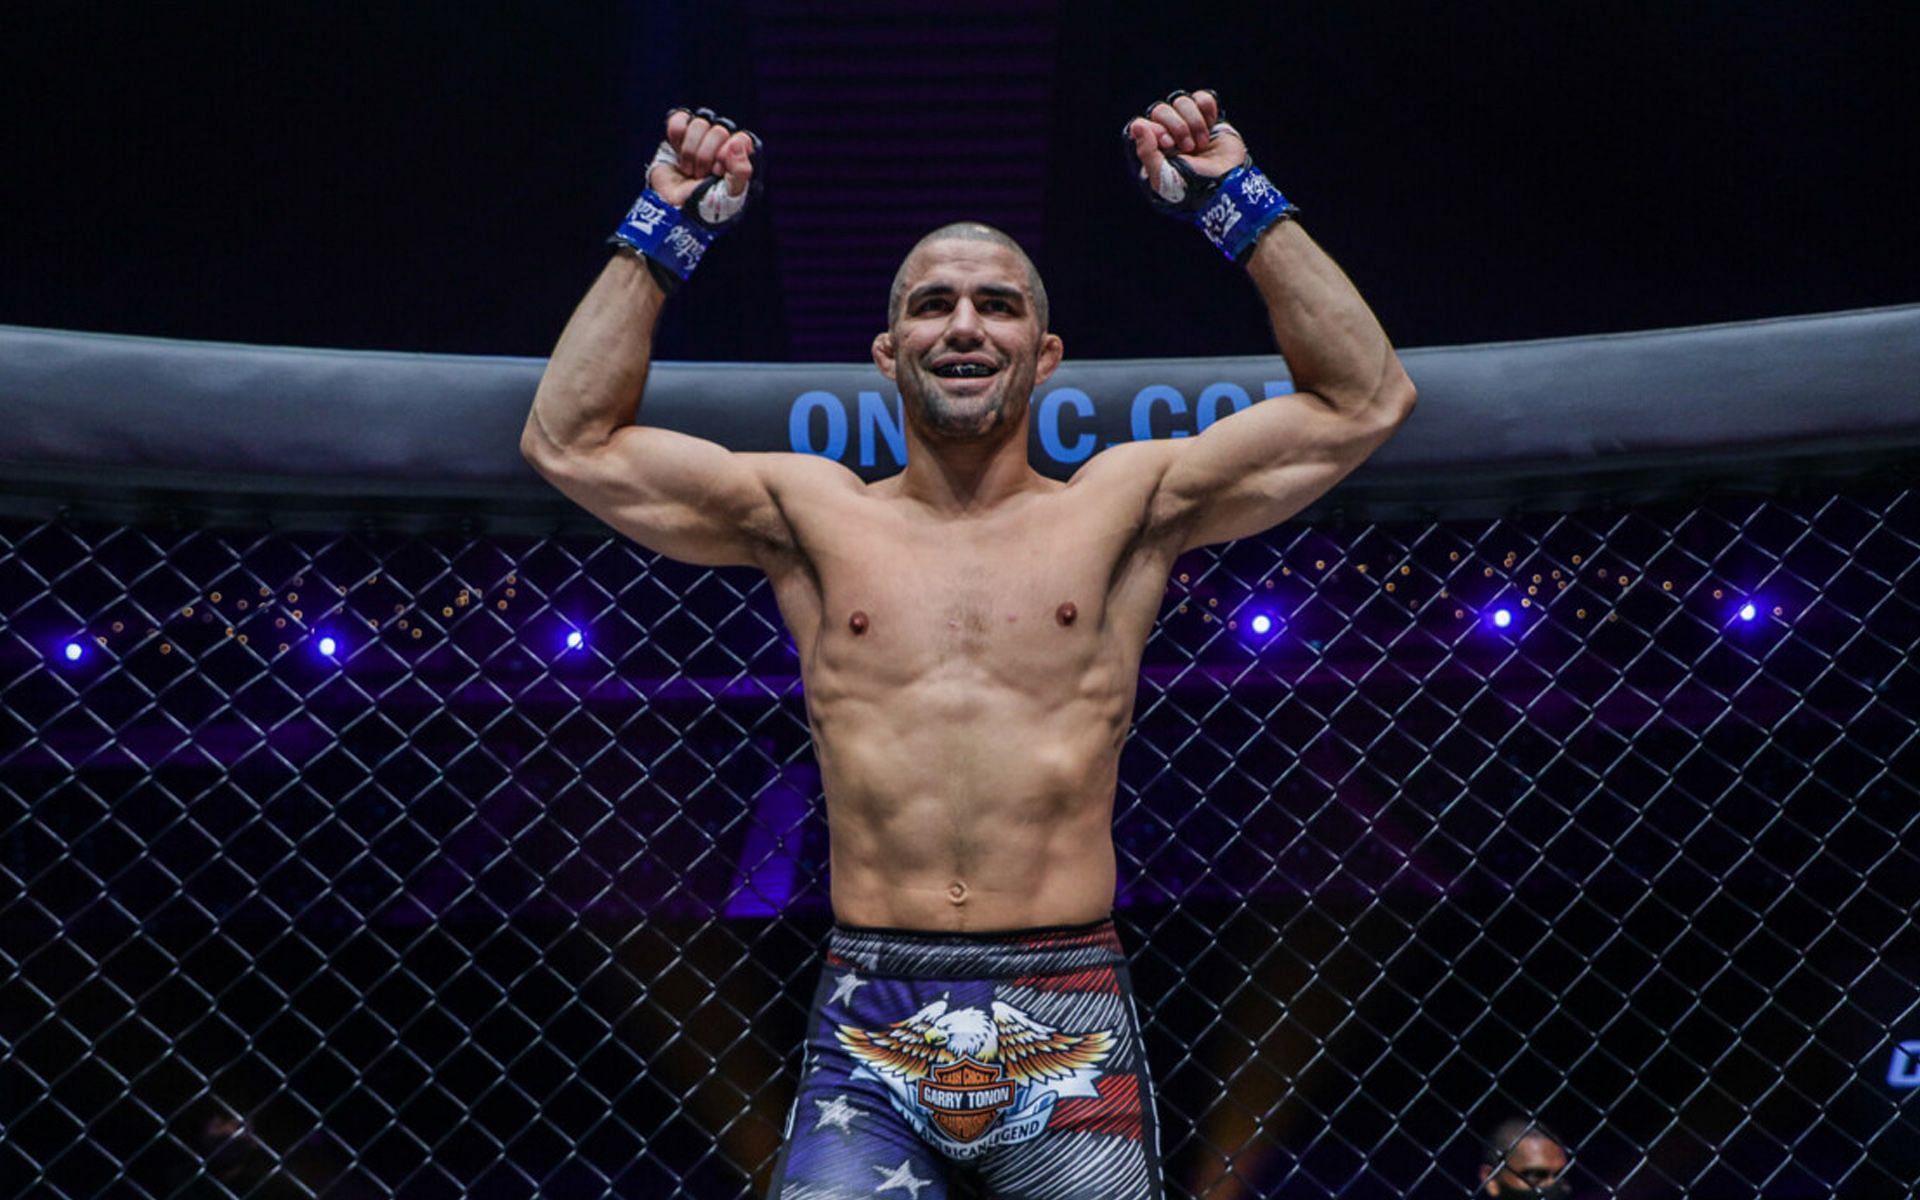 Garry Tonon is getting ready for action at Evolve MMA in Singapore. | [Photo: ONE Championship]